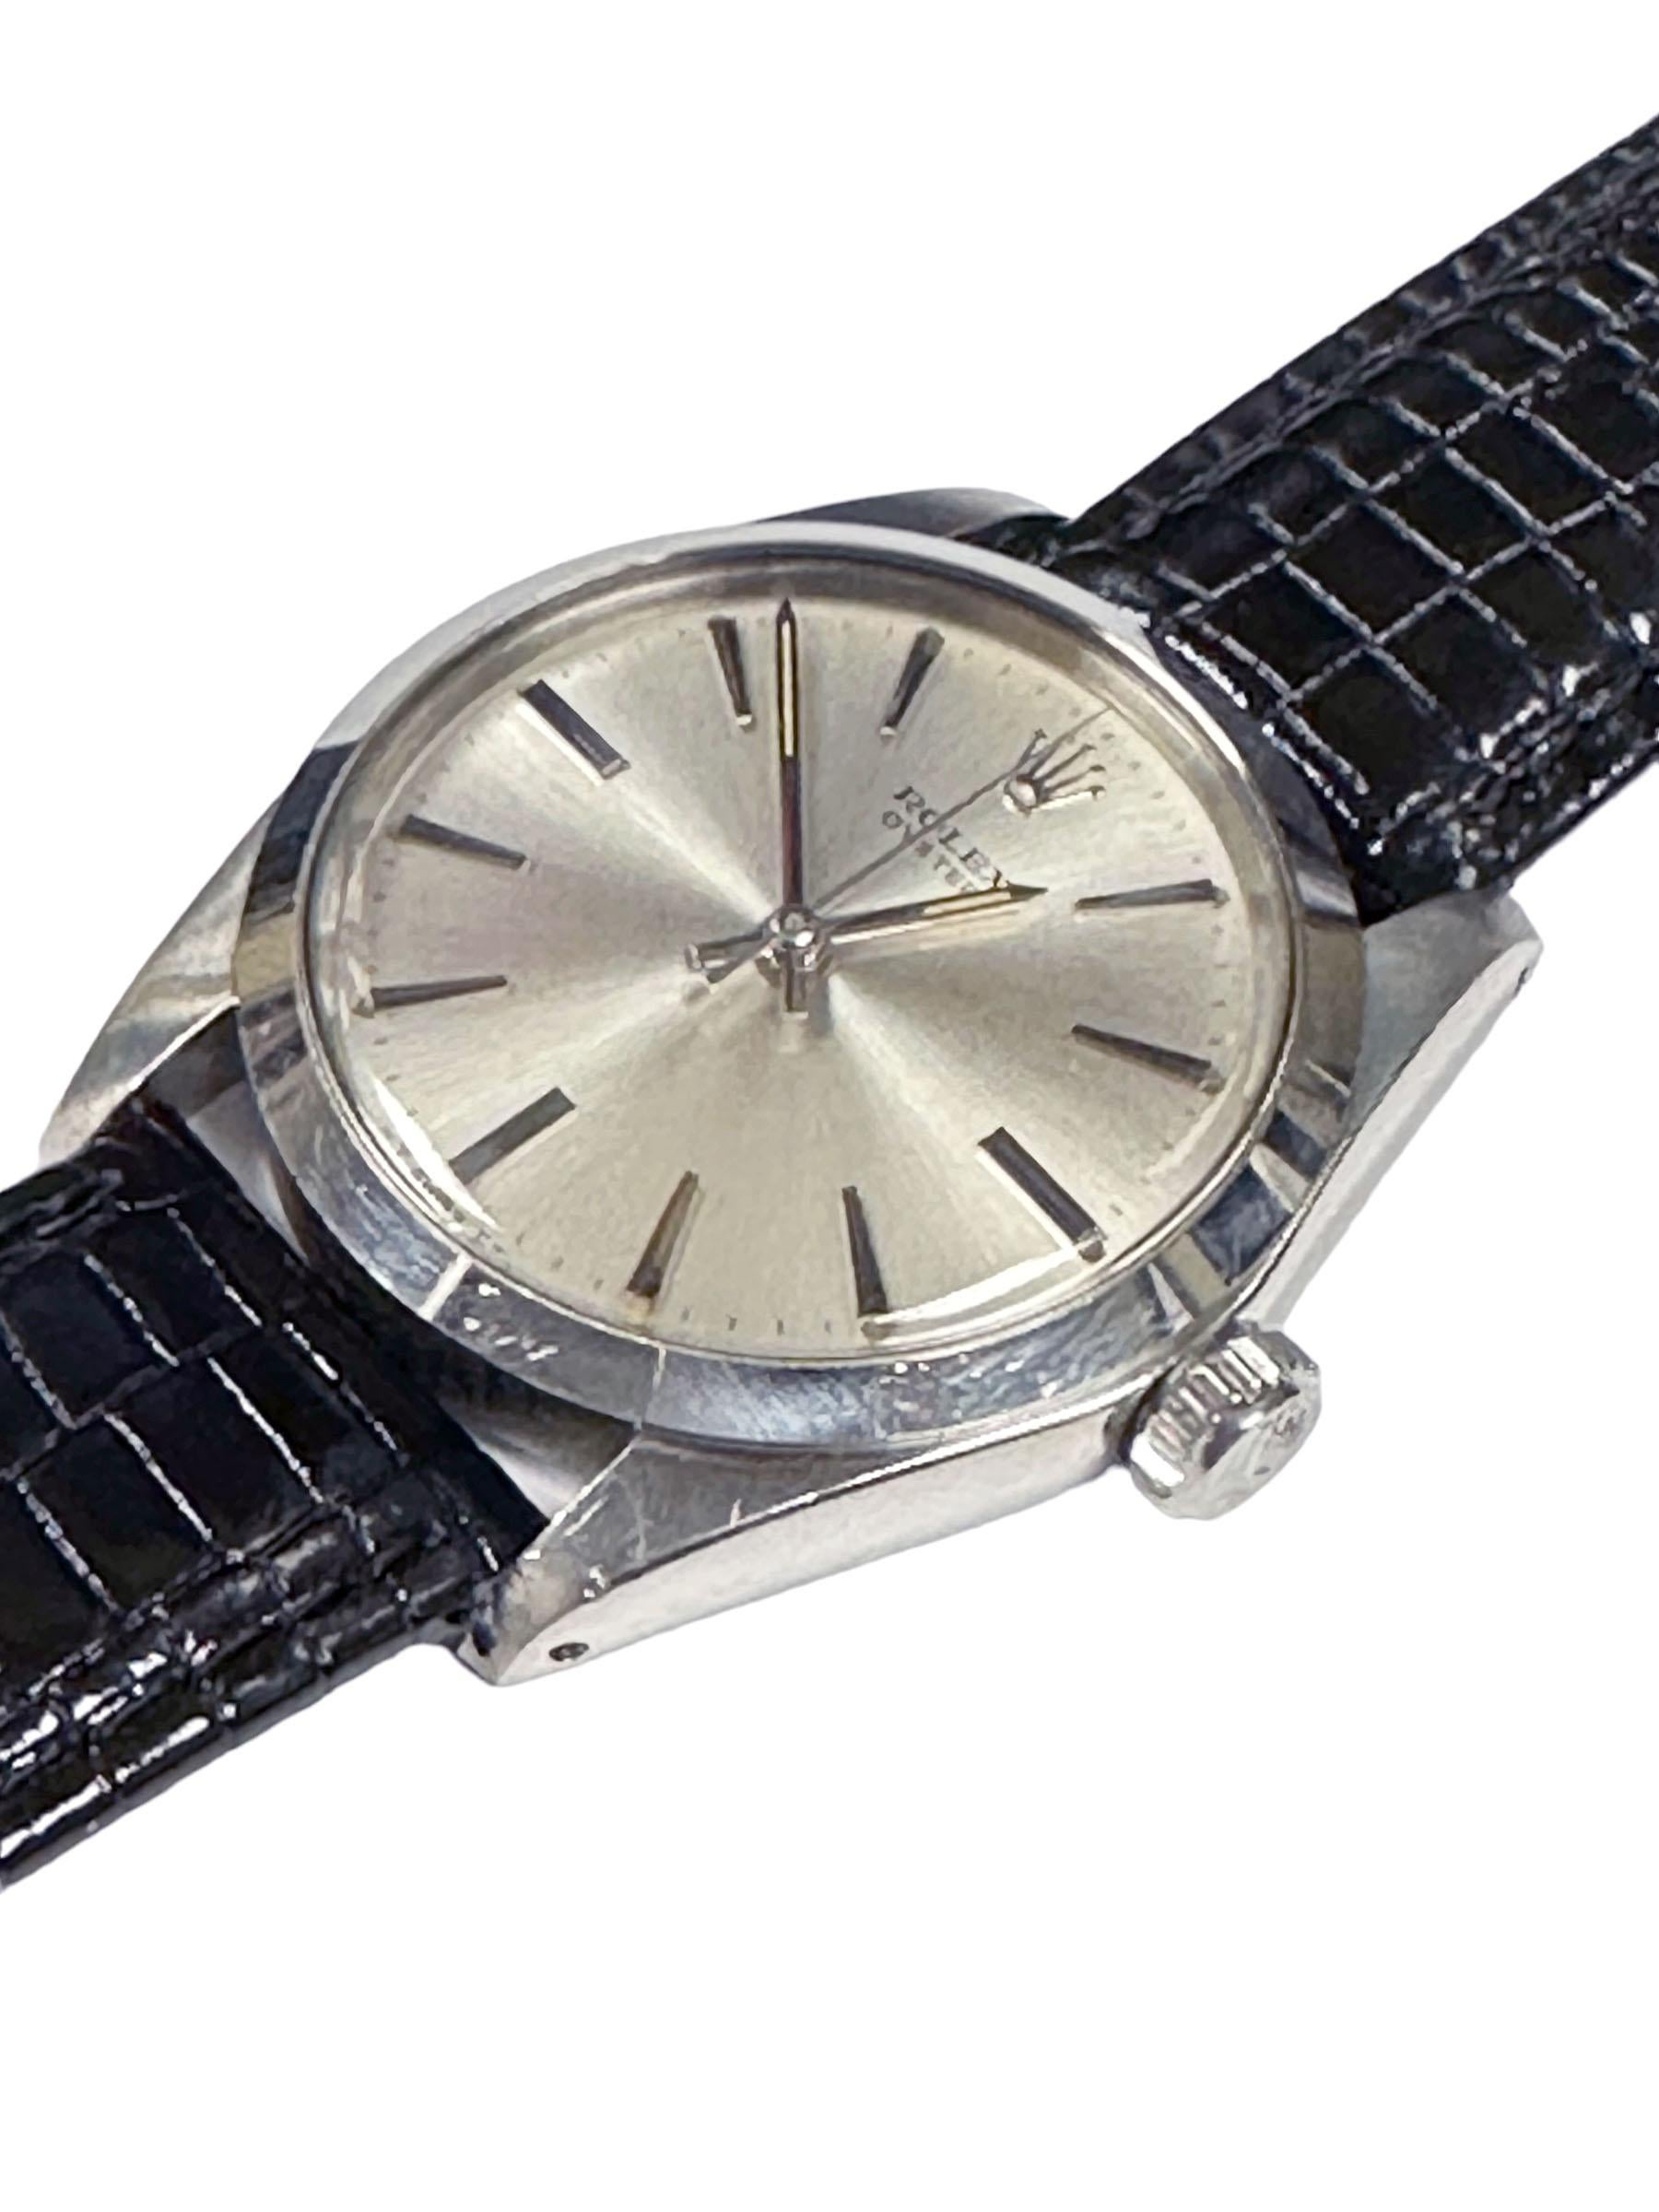 Circa 1959 Rolex Oyster Reference 6426 Wrist Watch, 34 M.M. Stainless Steel 3 Piece Oyster Case, Screw down Rolex Logo Crown, Caliber 1215 Mechanical, Manual wind movement. Beautiful Mint original Silver Satin Sunburst Dial with raised Markers and a